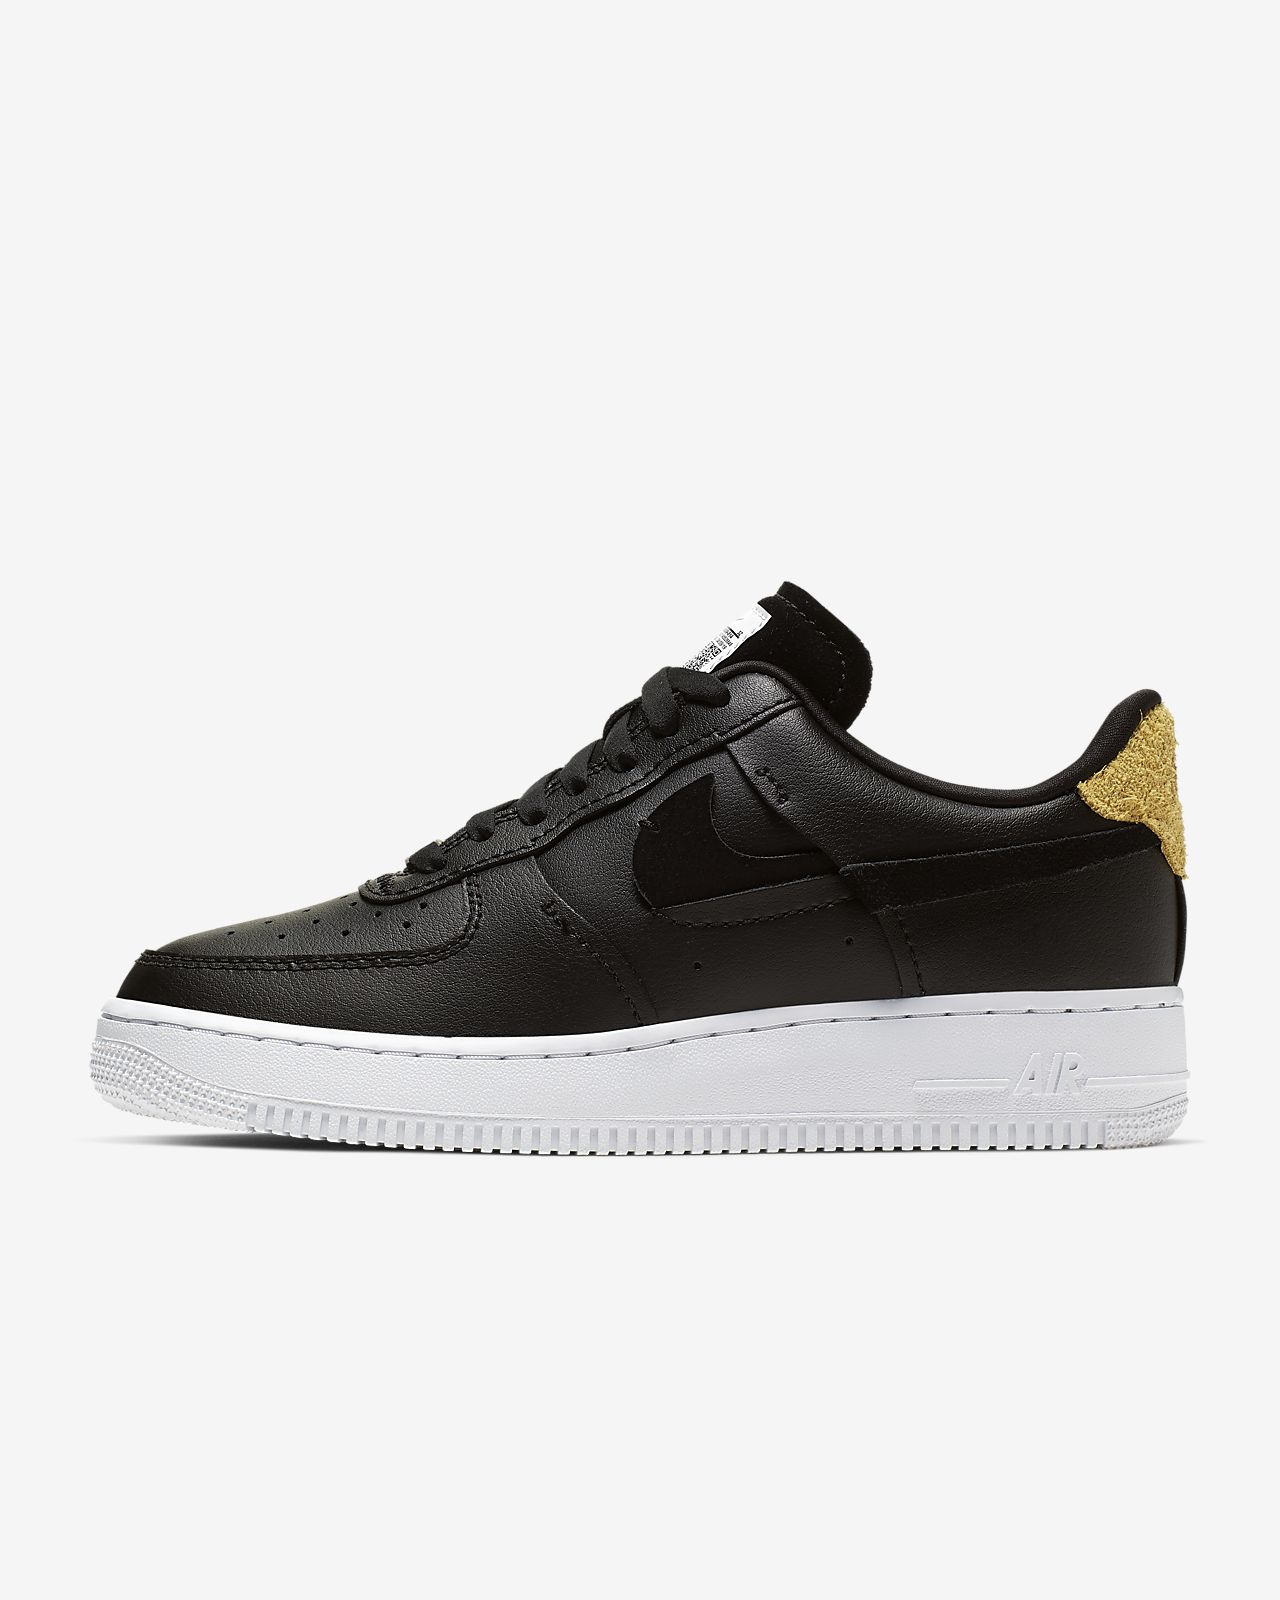 Buy where can you buy air force ones in store> OFF-73%